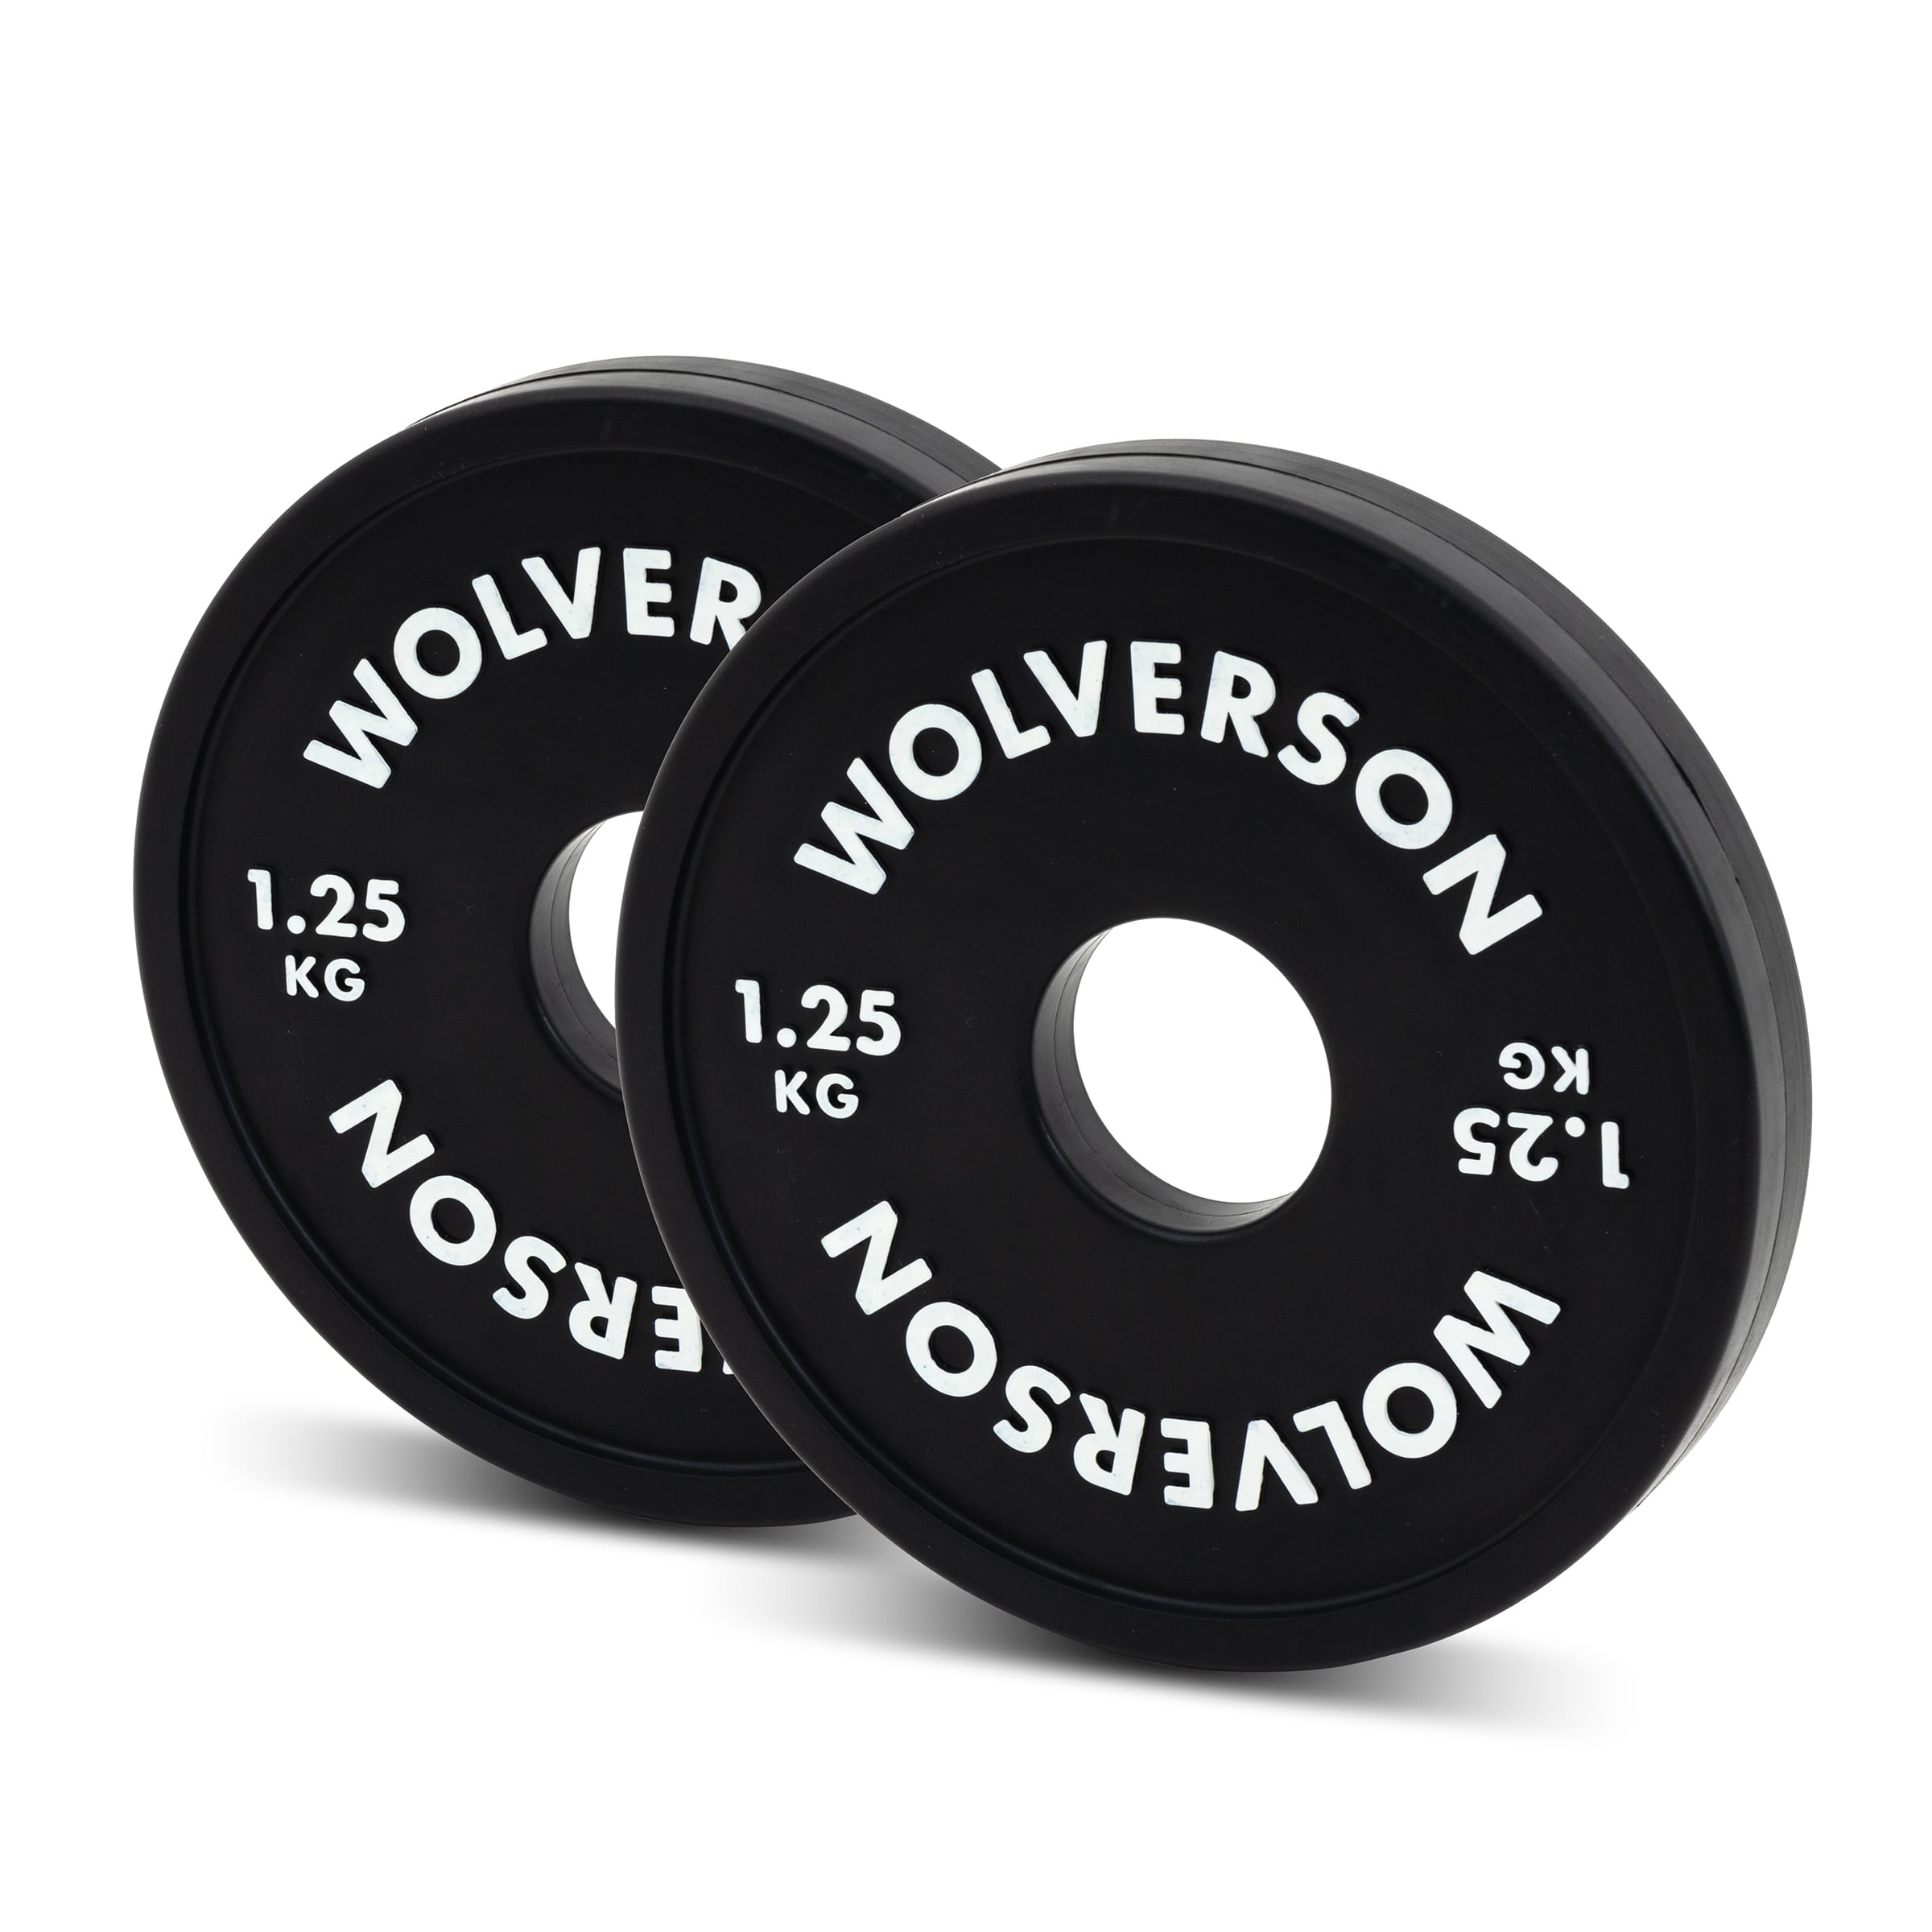 Wolverson Black Fractional Plates